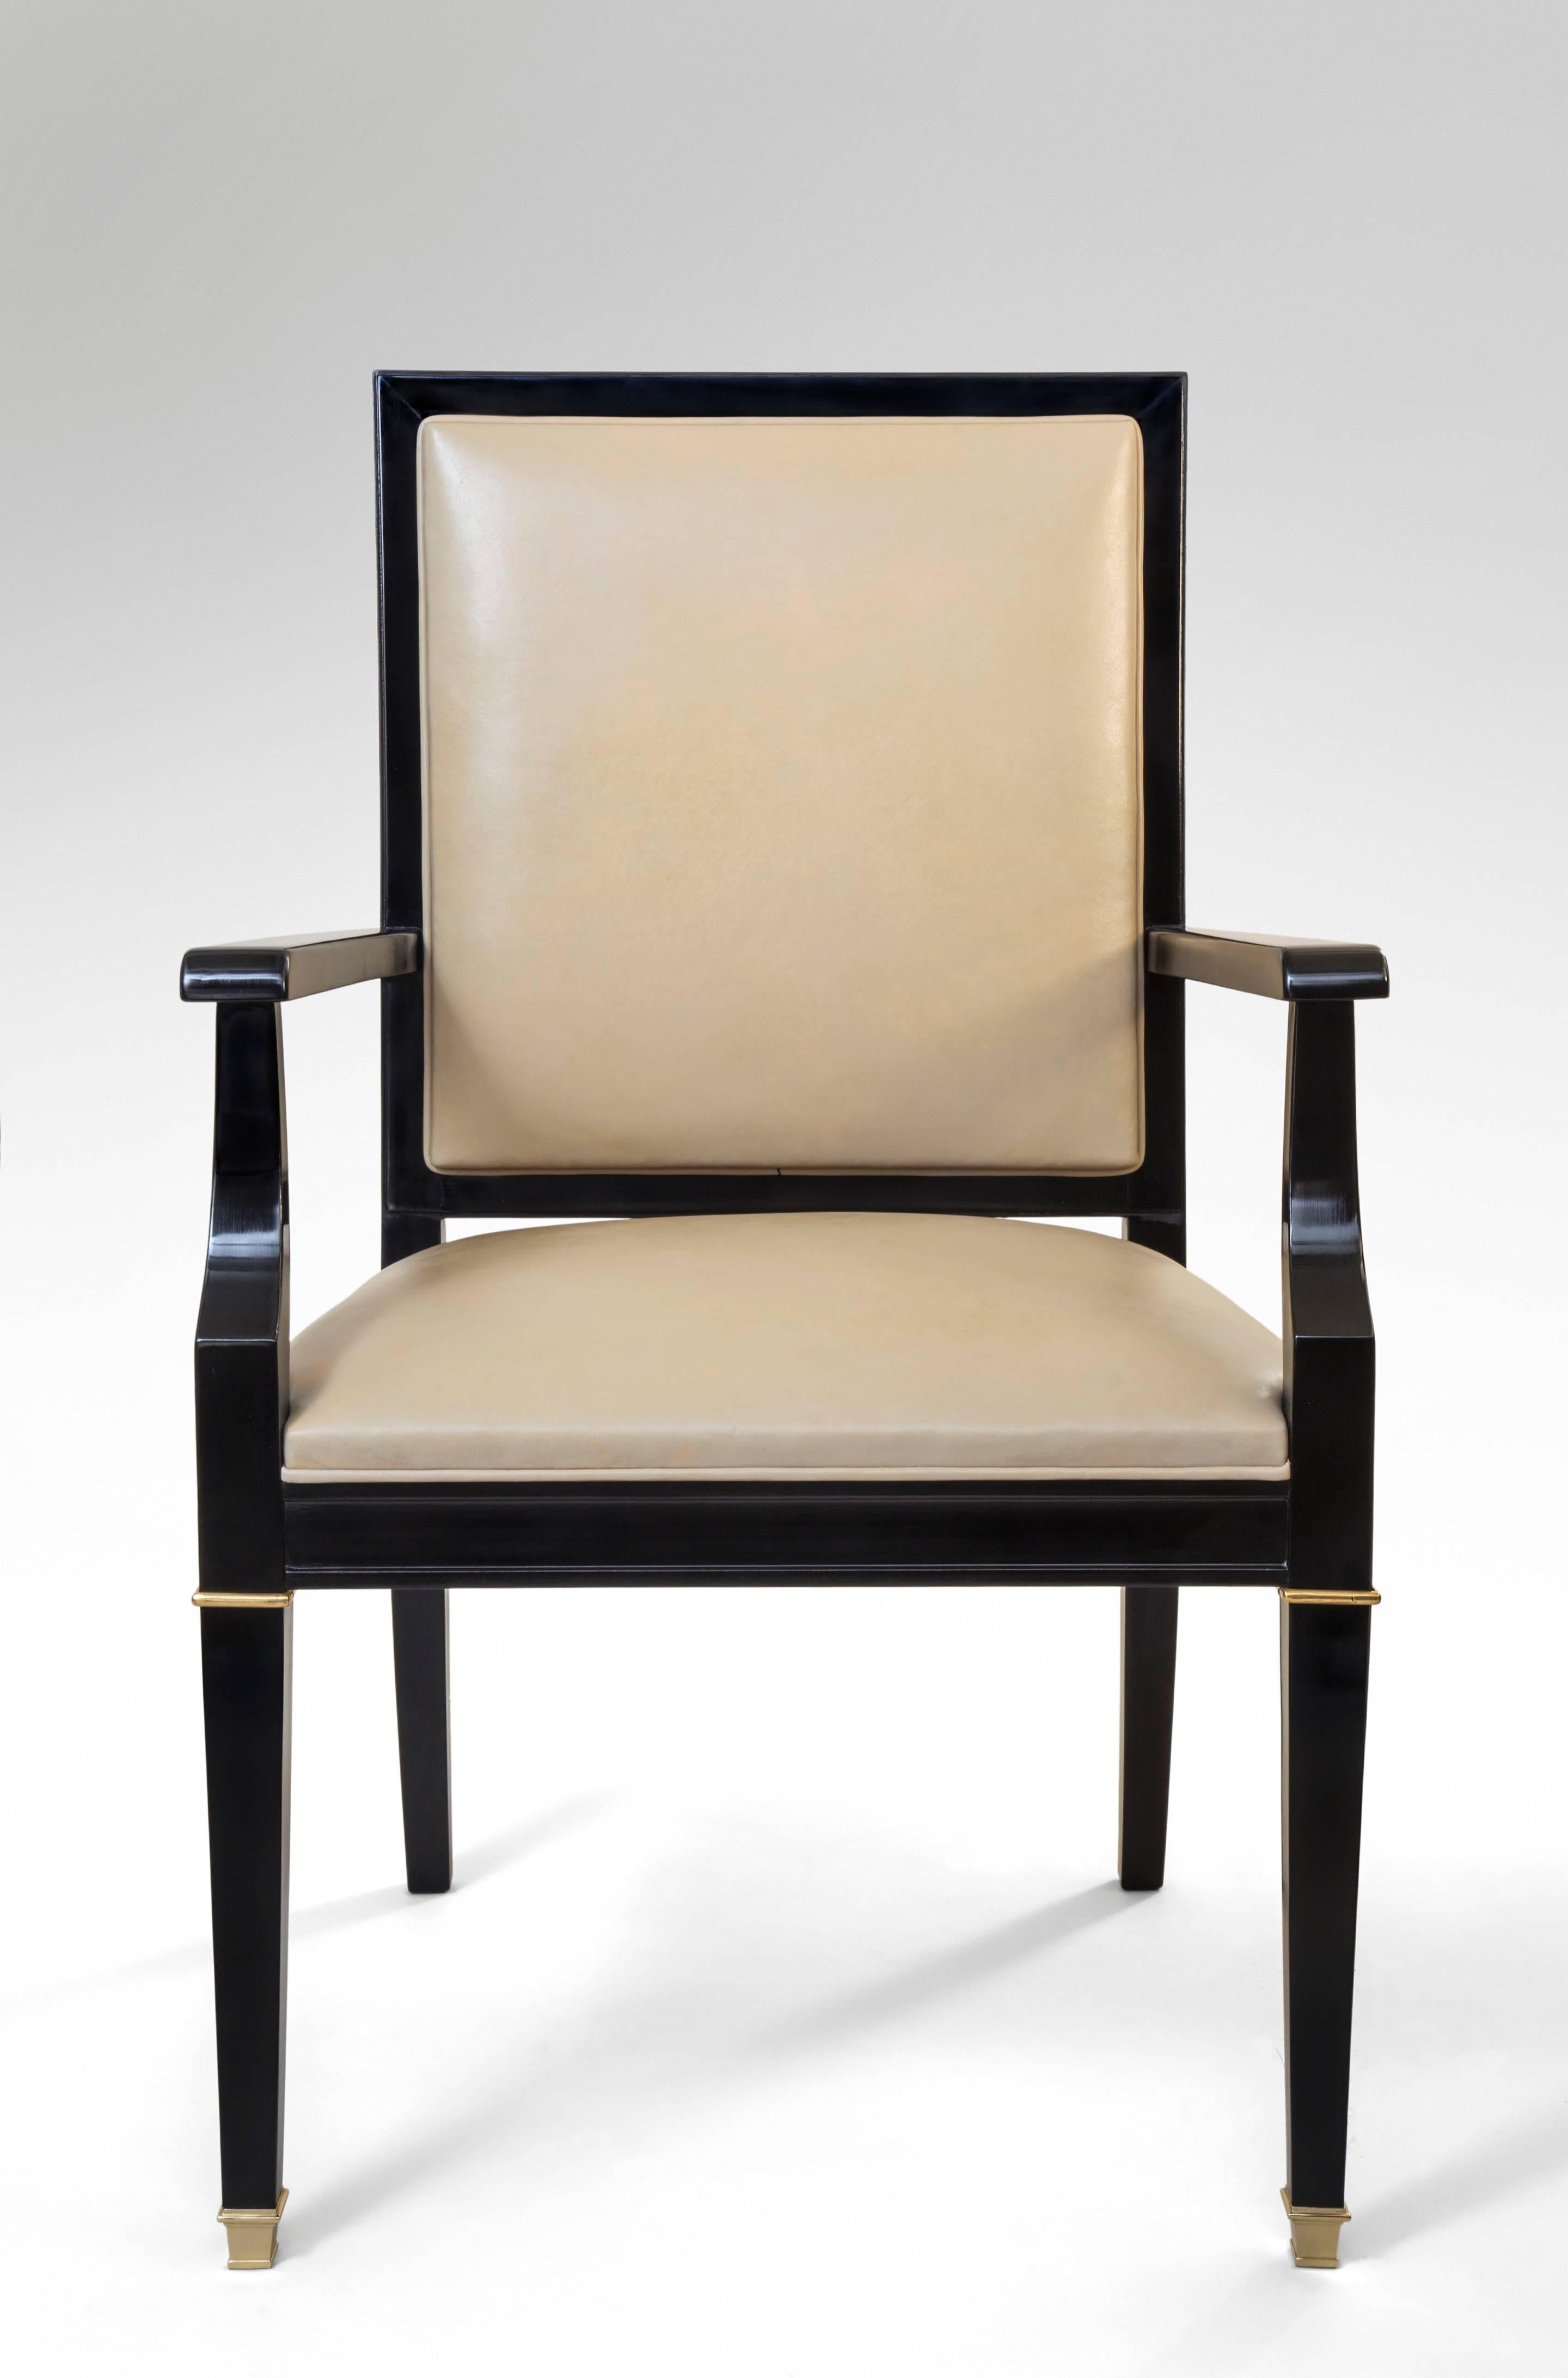 De Coene, Belgian Brass Mounted Black Lacquer Armchair The leather upholstered rectangular back and seat, with arms ending in scrolls, on square tapering legs front and saber legs back. Original leather worn.

Another chair available.